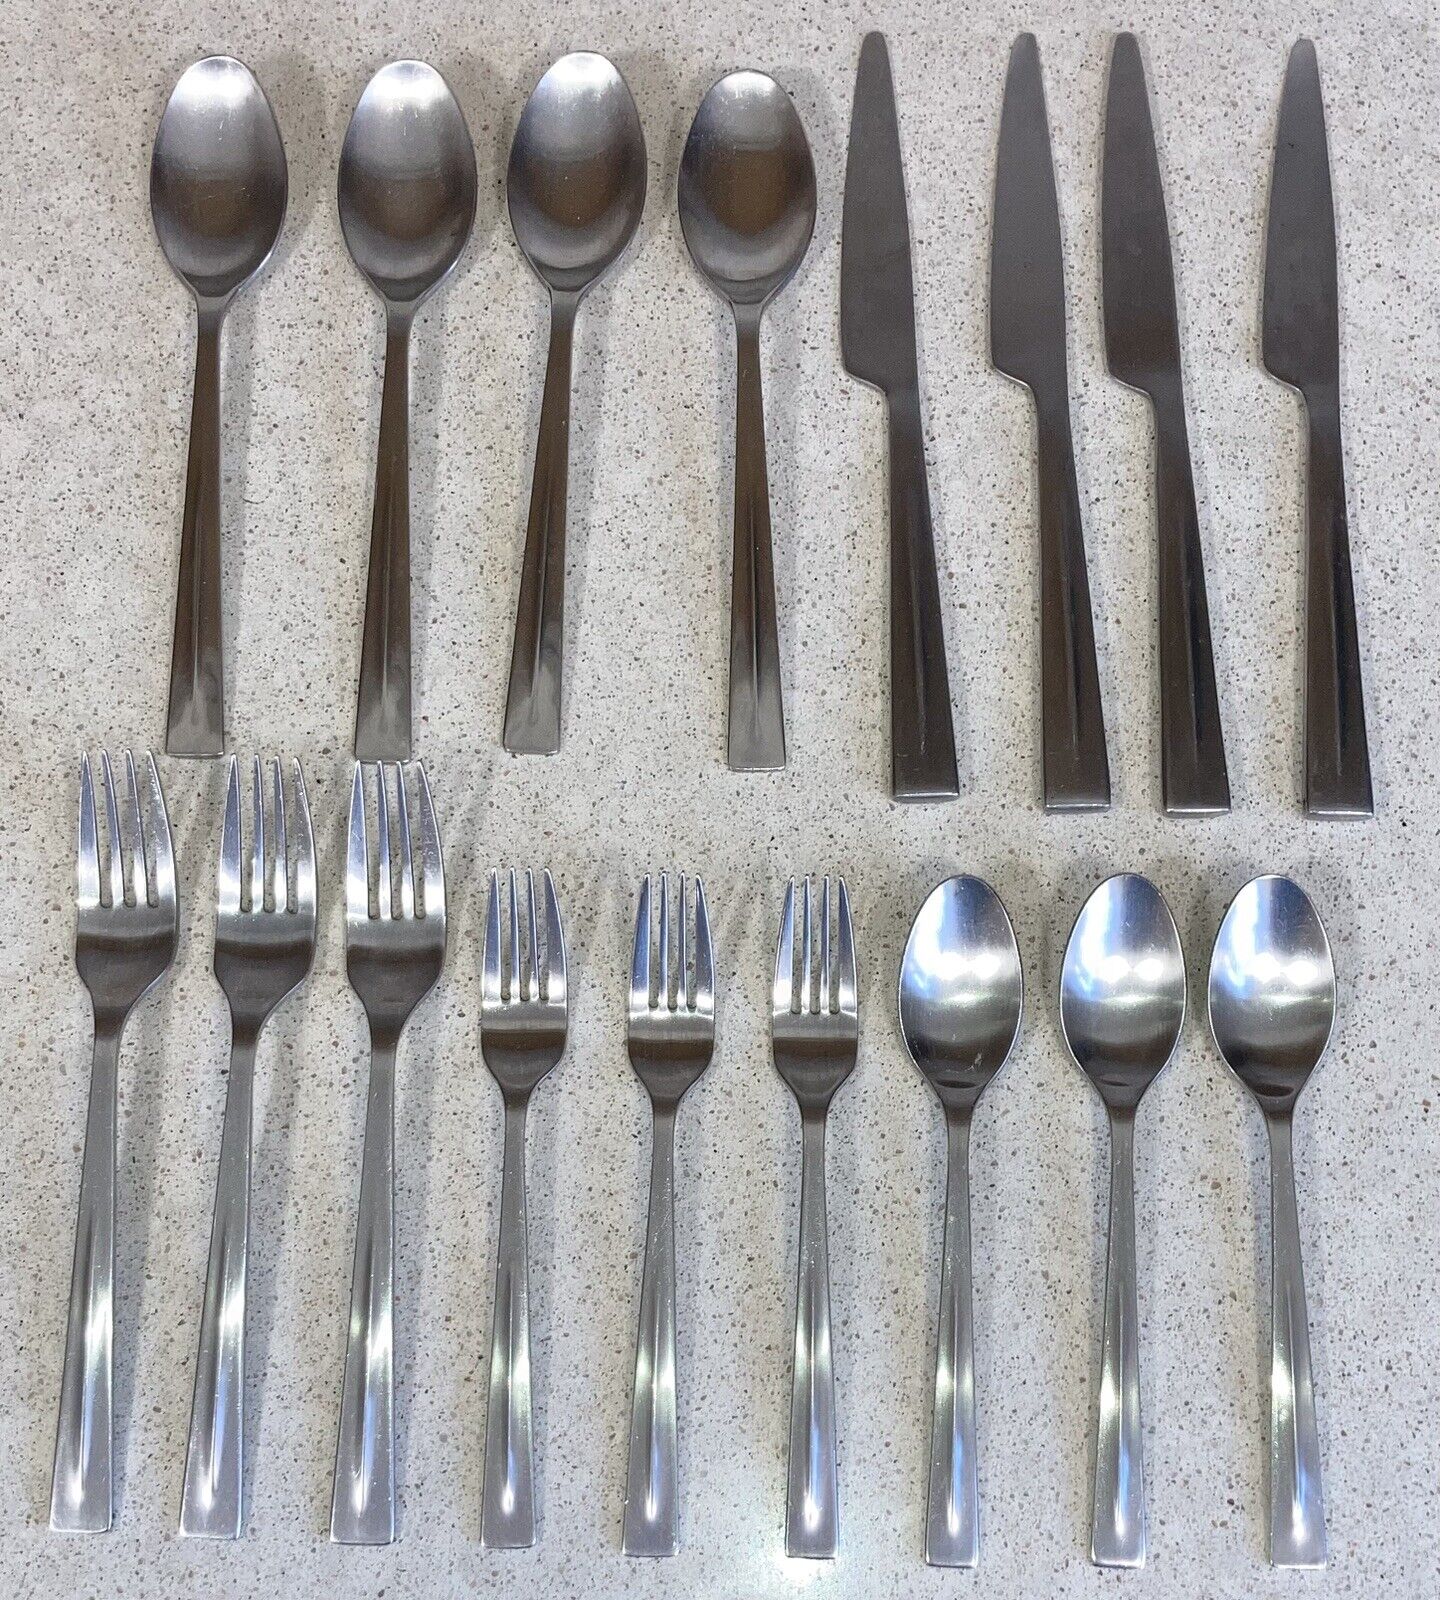 17 PIECE LOT OF GS GOURMET SETTINGS 18/8 STAINLESS FLATWARE - SOHO PATTERN